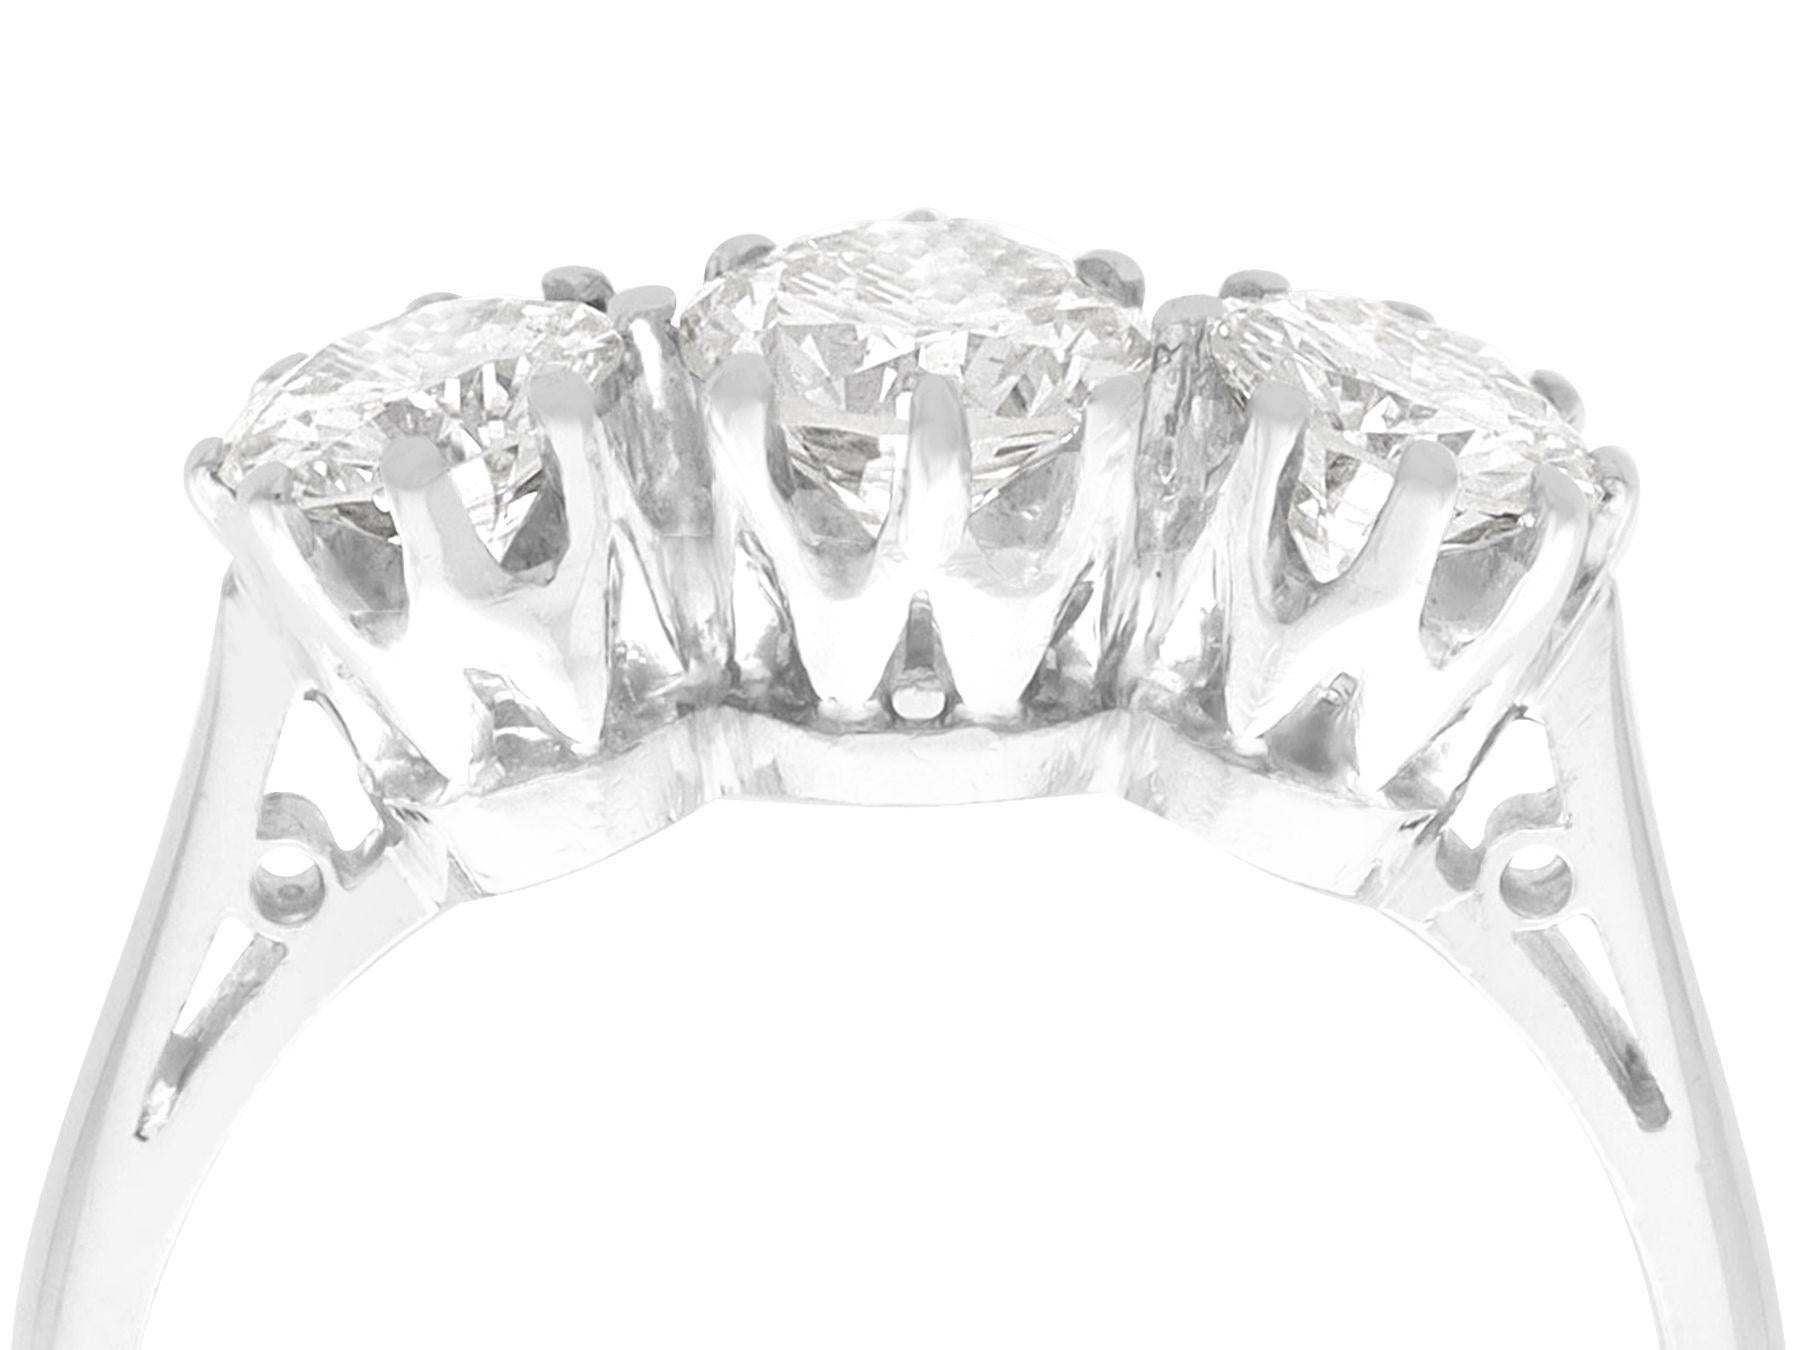 A stunning, fine and impressive 1.44 carat diamond and 18 karat white gold trilogy ring; part of our diverse antique jewellery and estate jewelry collections

This fine and impressive diamond three stone ring has been crafted in 18k white gold.

The